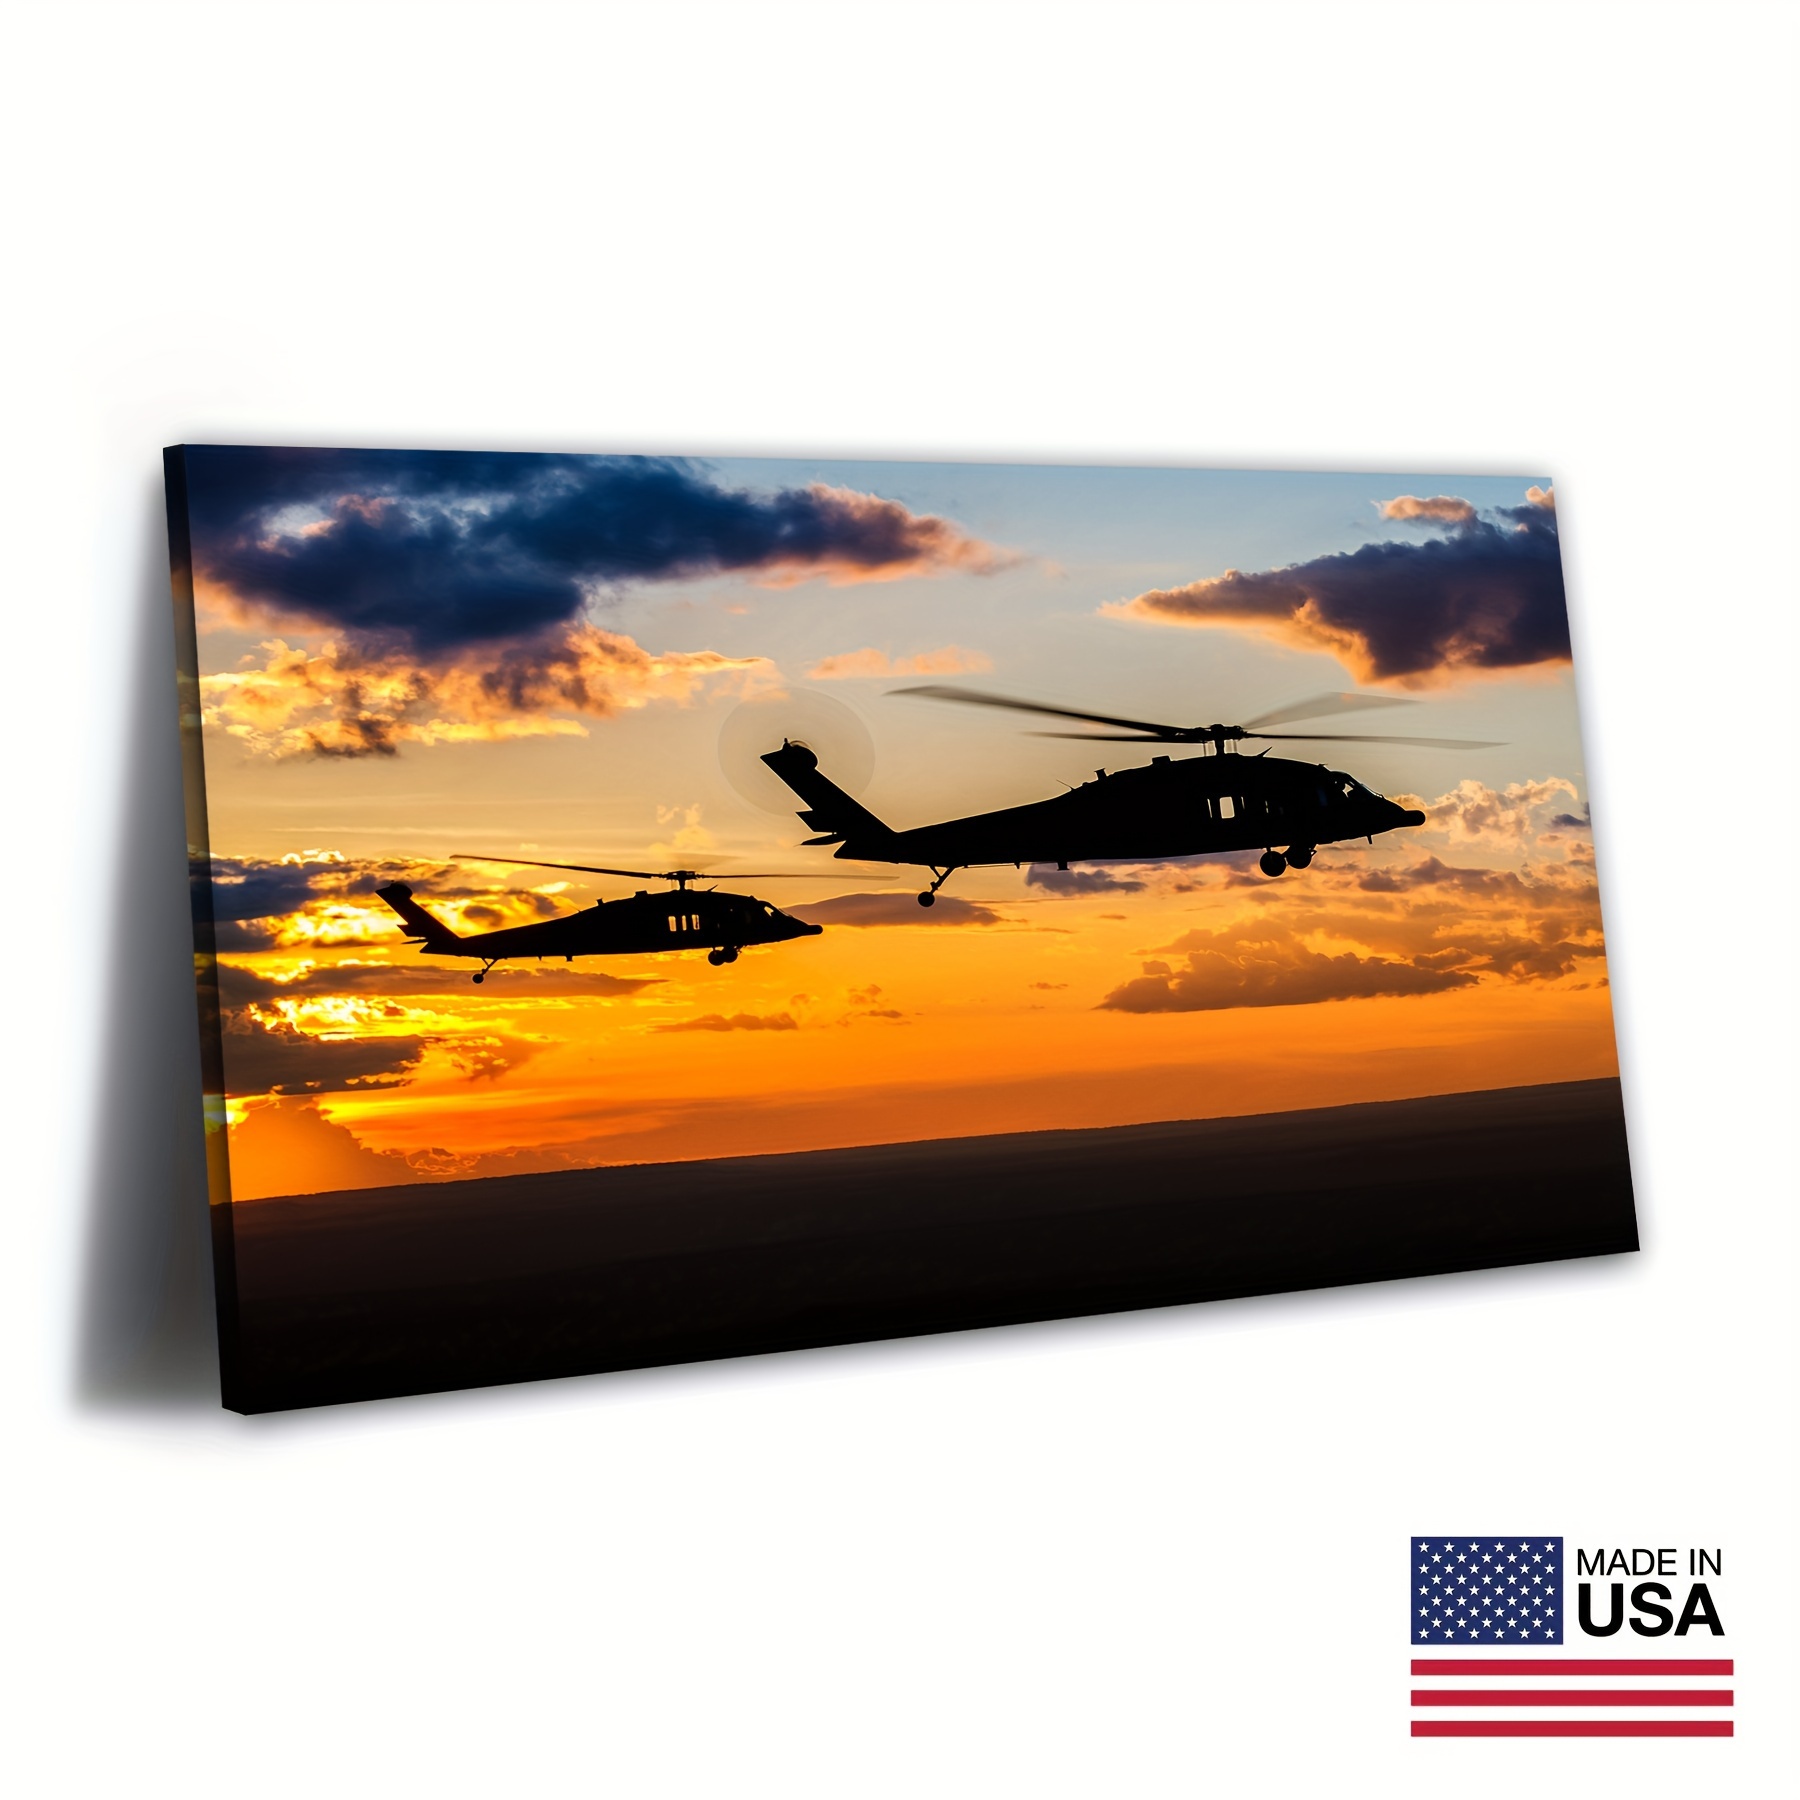 

1pc Wooden Framed Helicopter Canvas Wall Art Sunset Landscape Clouds Poster Picture For Modern Office Family Bedroom Living Room Decor, Canvas Framed